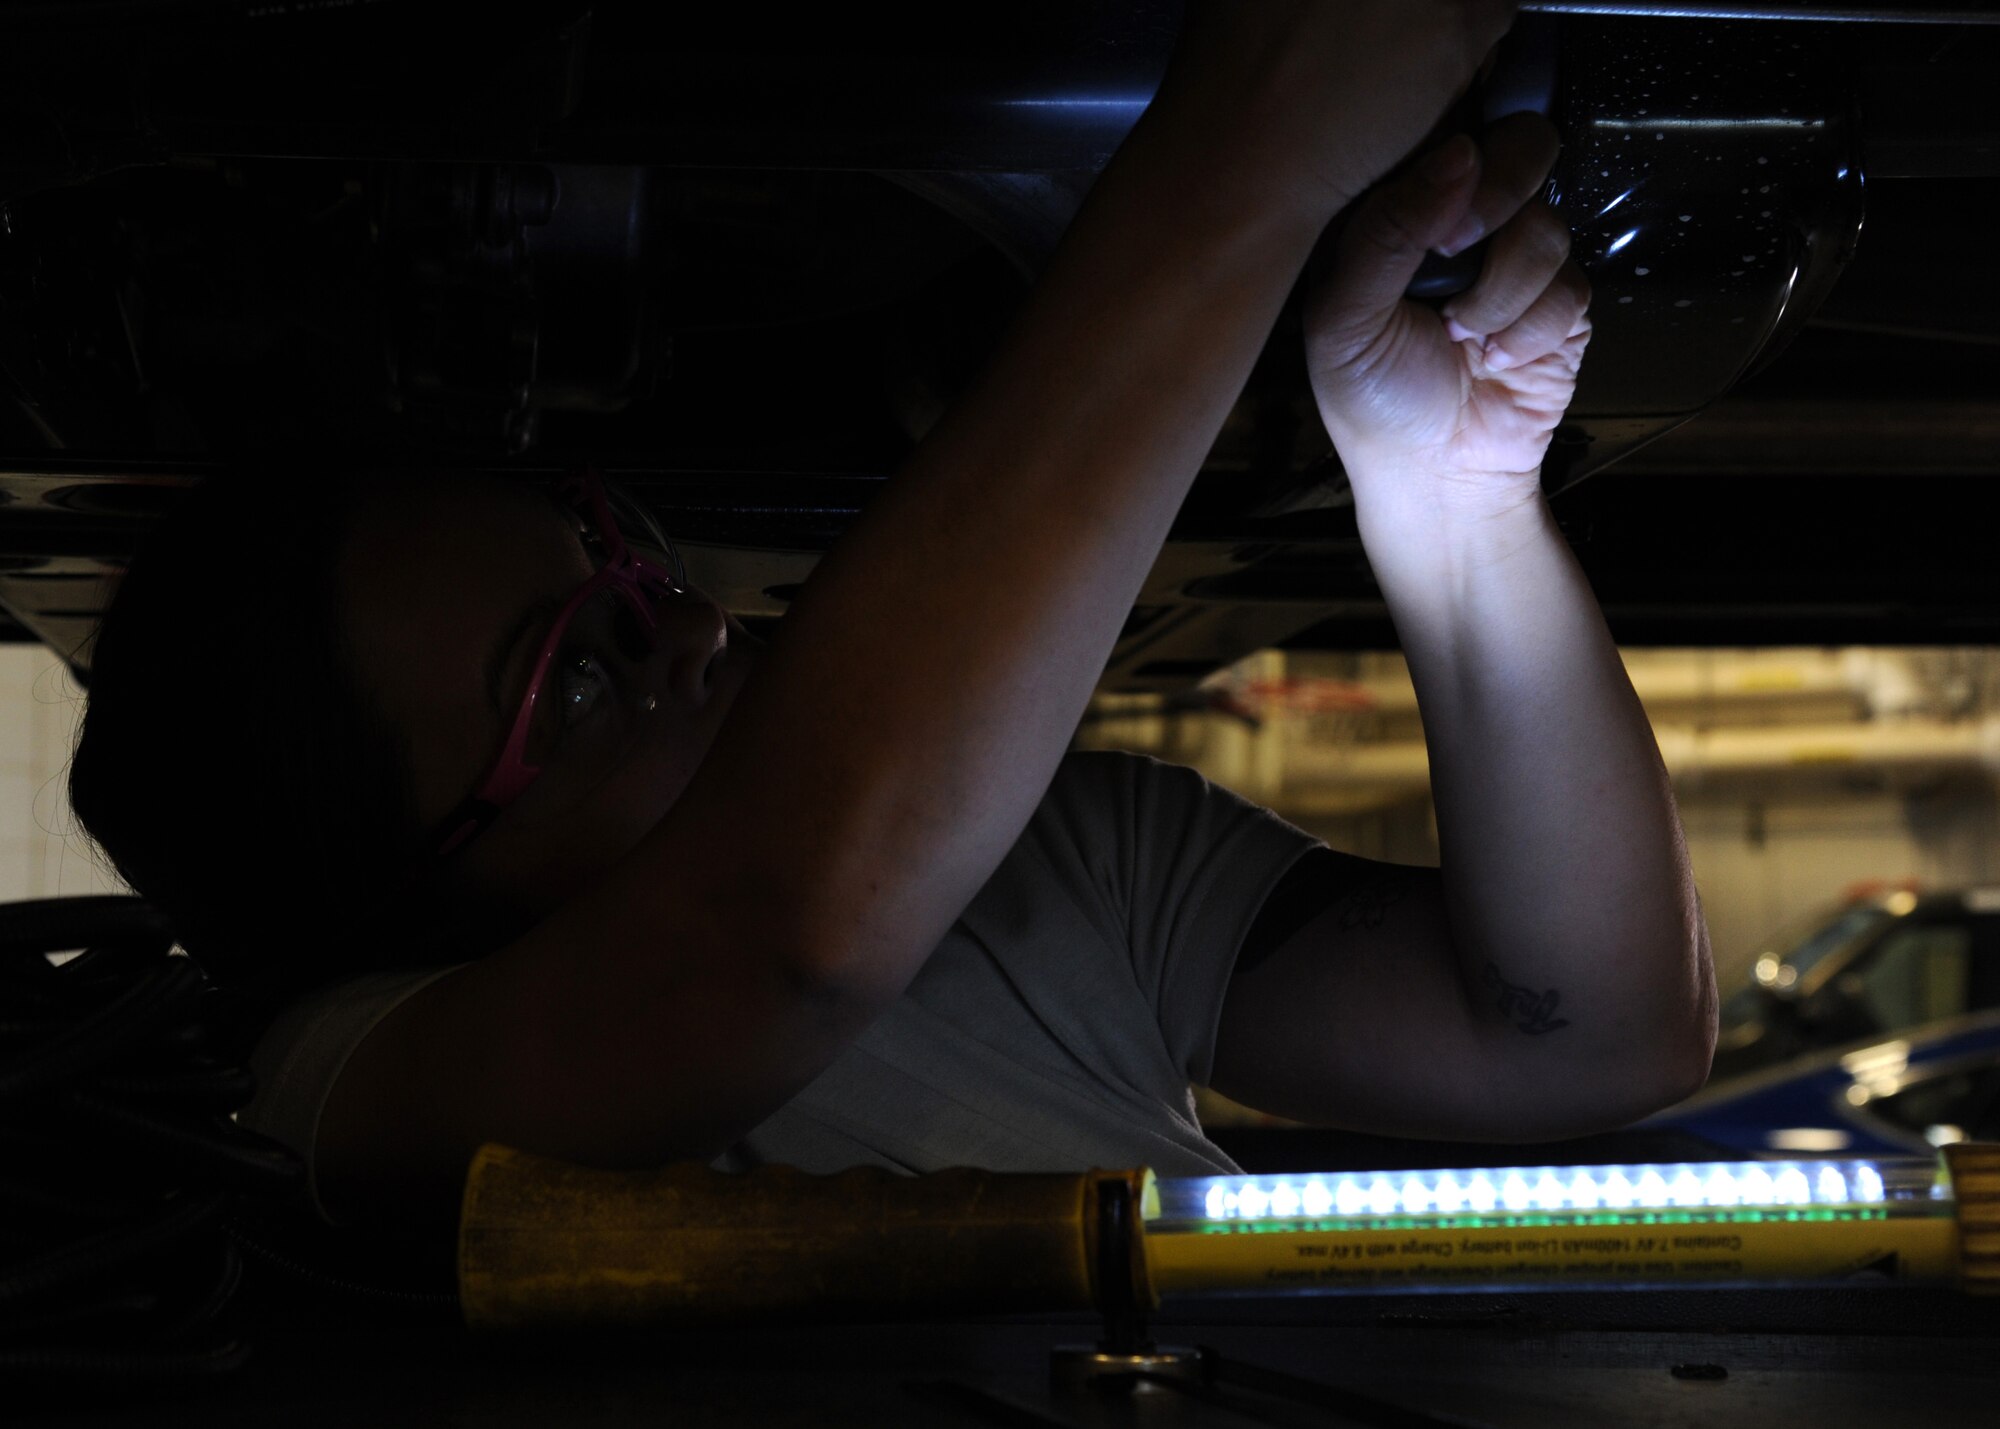 Staff Sgt. Jessica Kemmy, 319th Logistics Readiness Squadron vehicle and vehicular equipment maintenance technician, works underneath a truck Sept. 21, 2015, on Grand Forks Air Force Base, North Dakota. The 319th LRS is scheduled to provide free vehicle inspections Sept. 26, 2015, in preparation for winter. (U.S. Air Force photo by Airman 1st Class Ryan Sparks/Released)